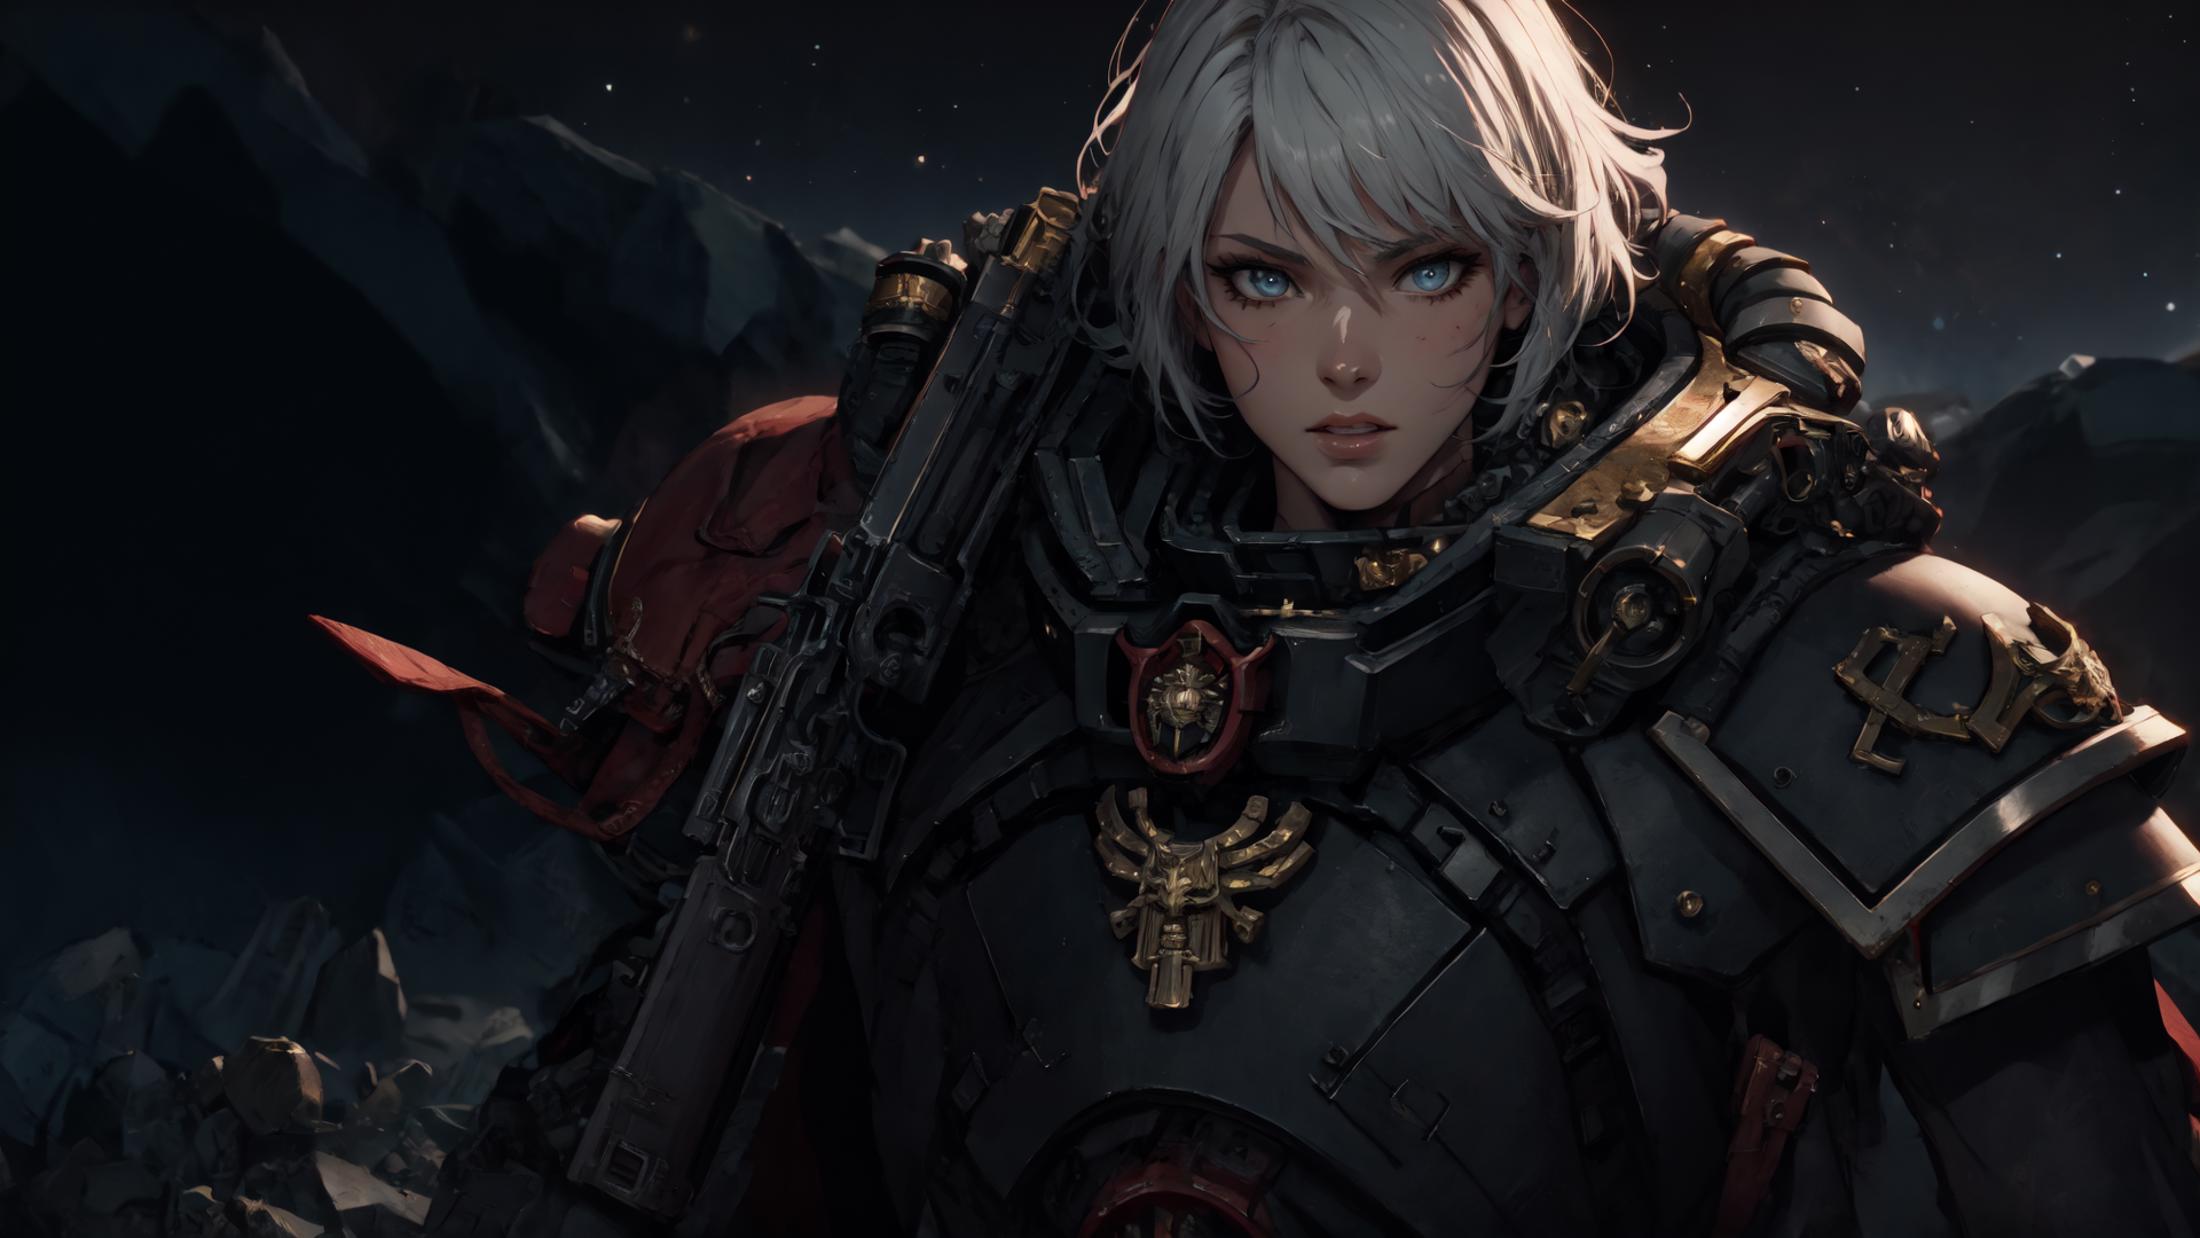 Warhammer 40K Sisters of Battle image by lXlBaNNeR